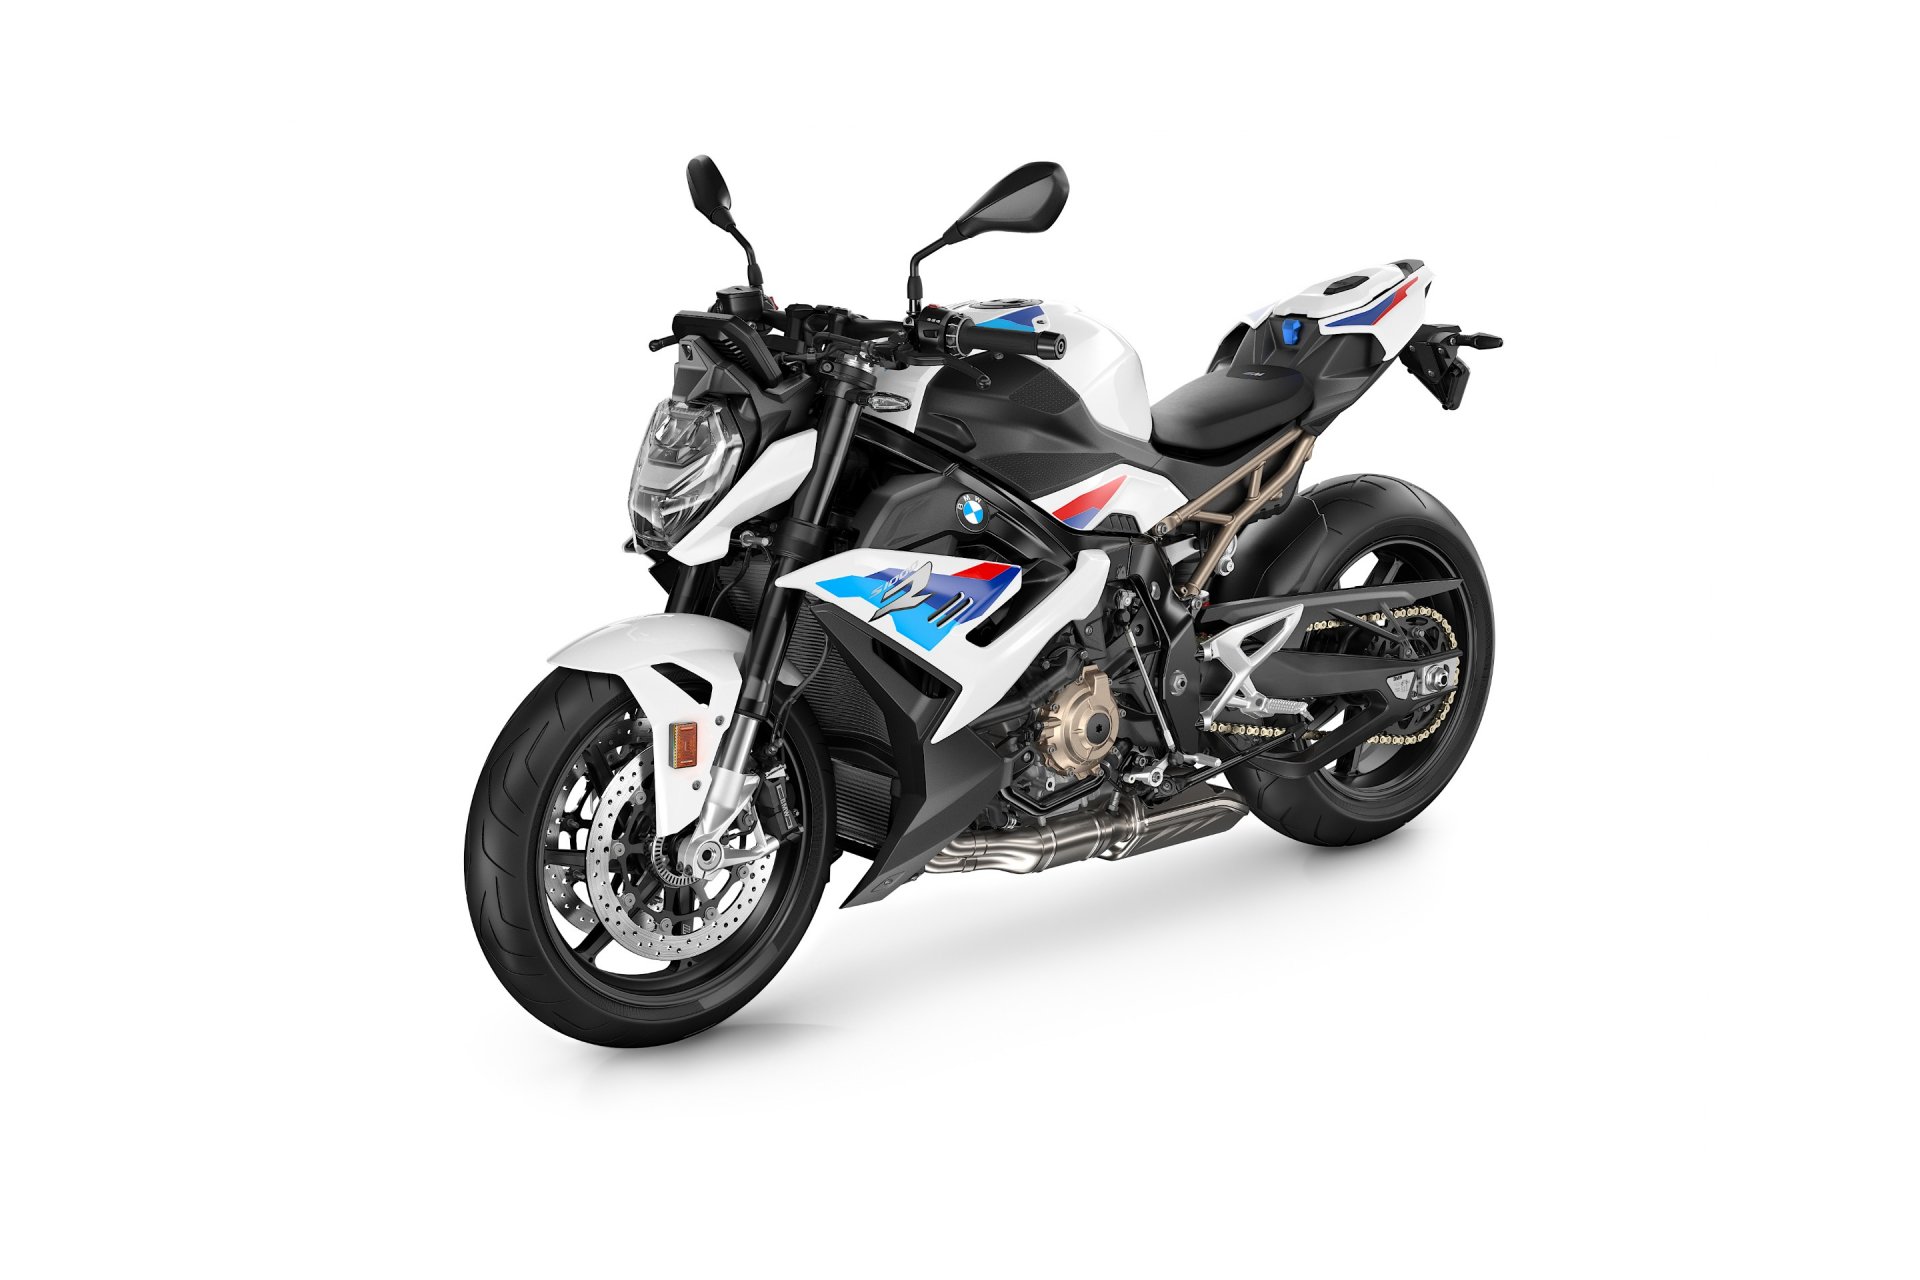 P90407256_highRes_the-new-bmw-s-1000-r (1)